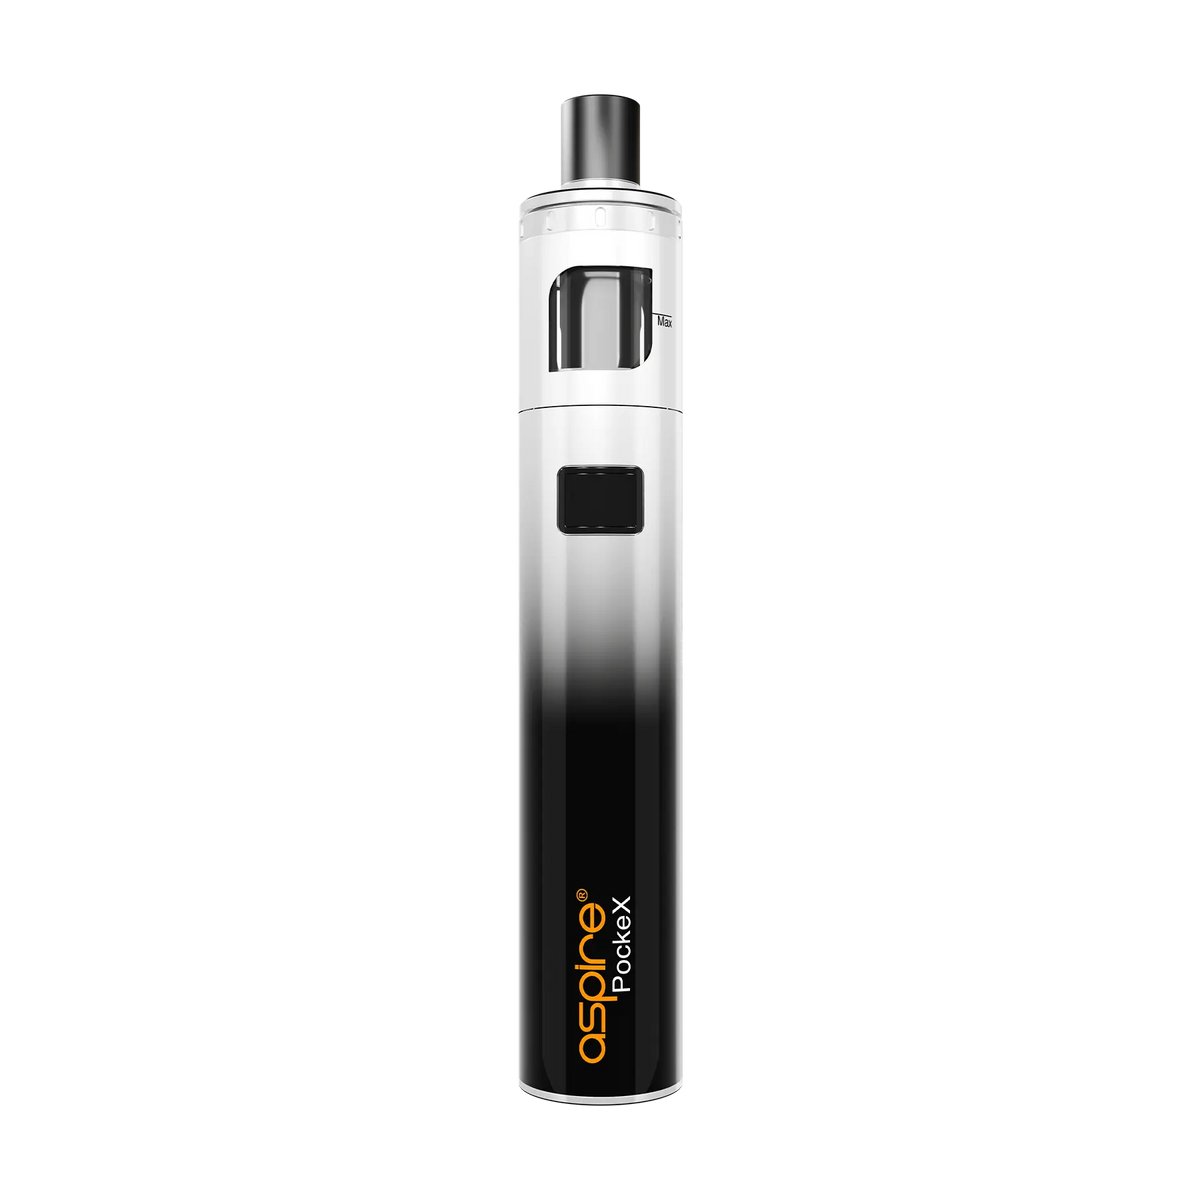 Aspire UK PockeX Anniversary Edition Mouth To Lung Kit - Black Gradient